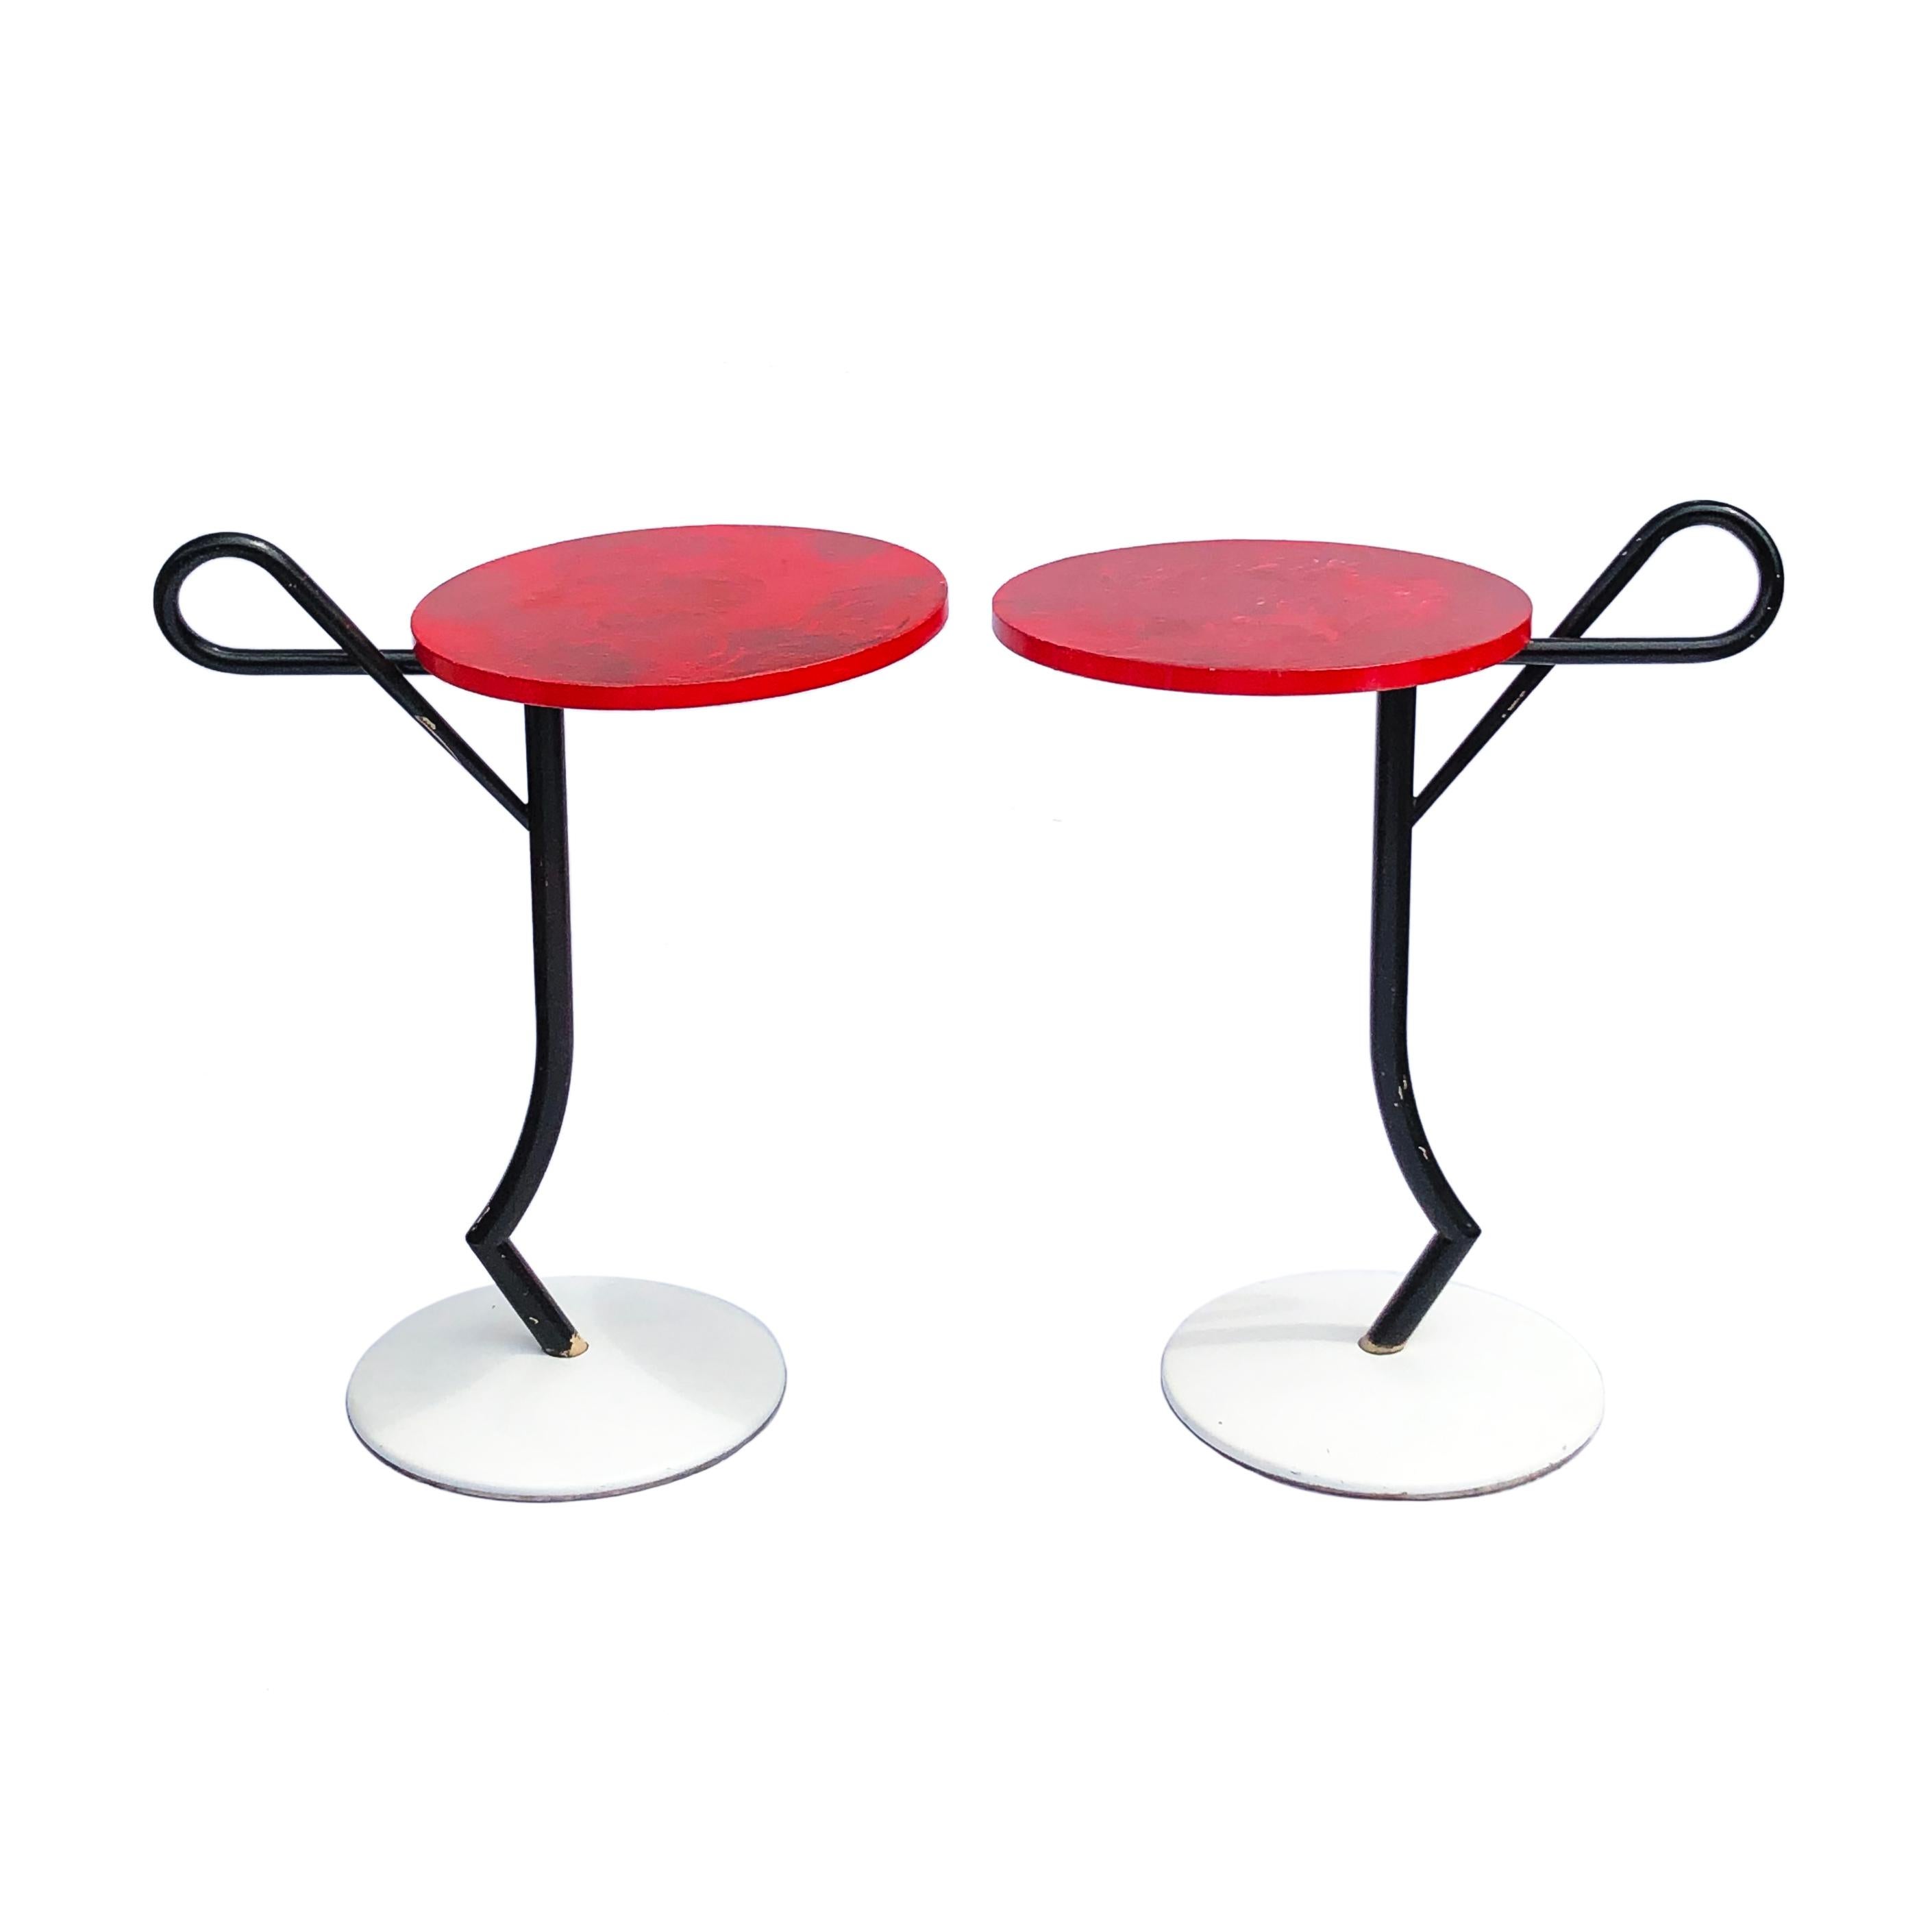 A unique pair of modernist side tables made in the 1980s and in the style of Memphis Design. Black curved rod iron frame with a bended handle on top of a white round plastic base with iron weights below supporting the red round table tops. The table